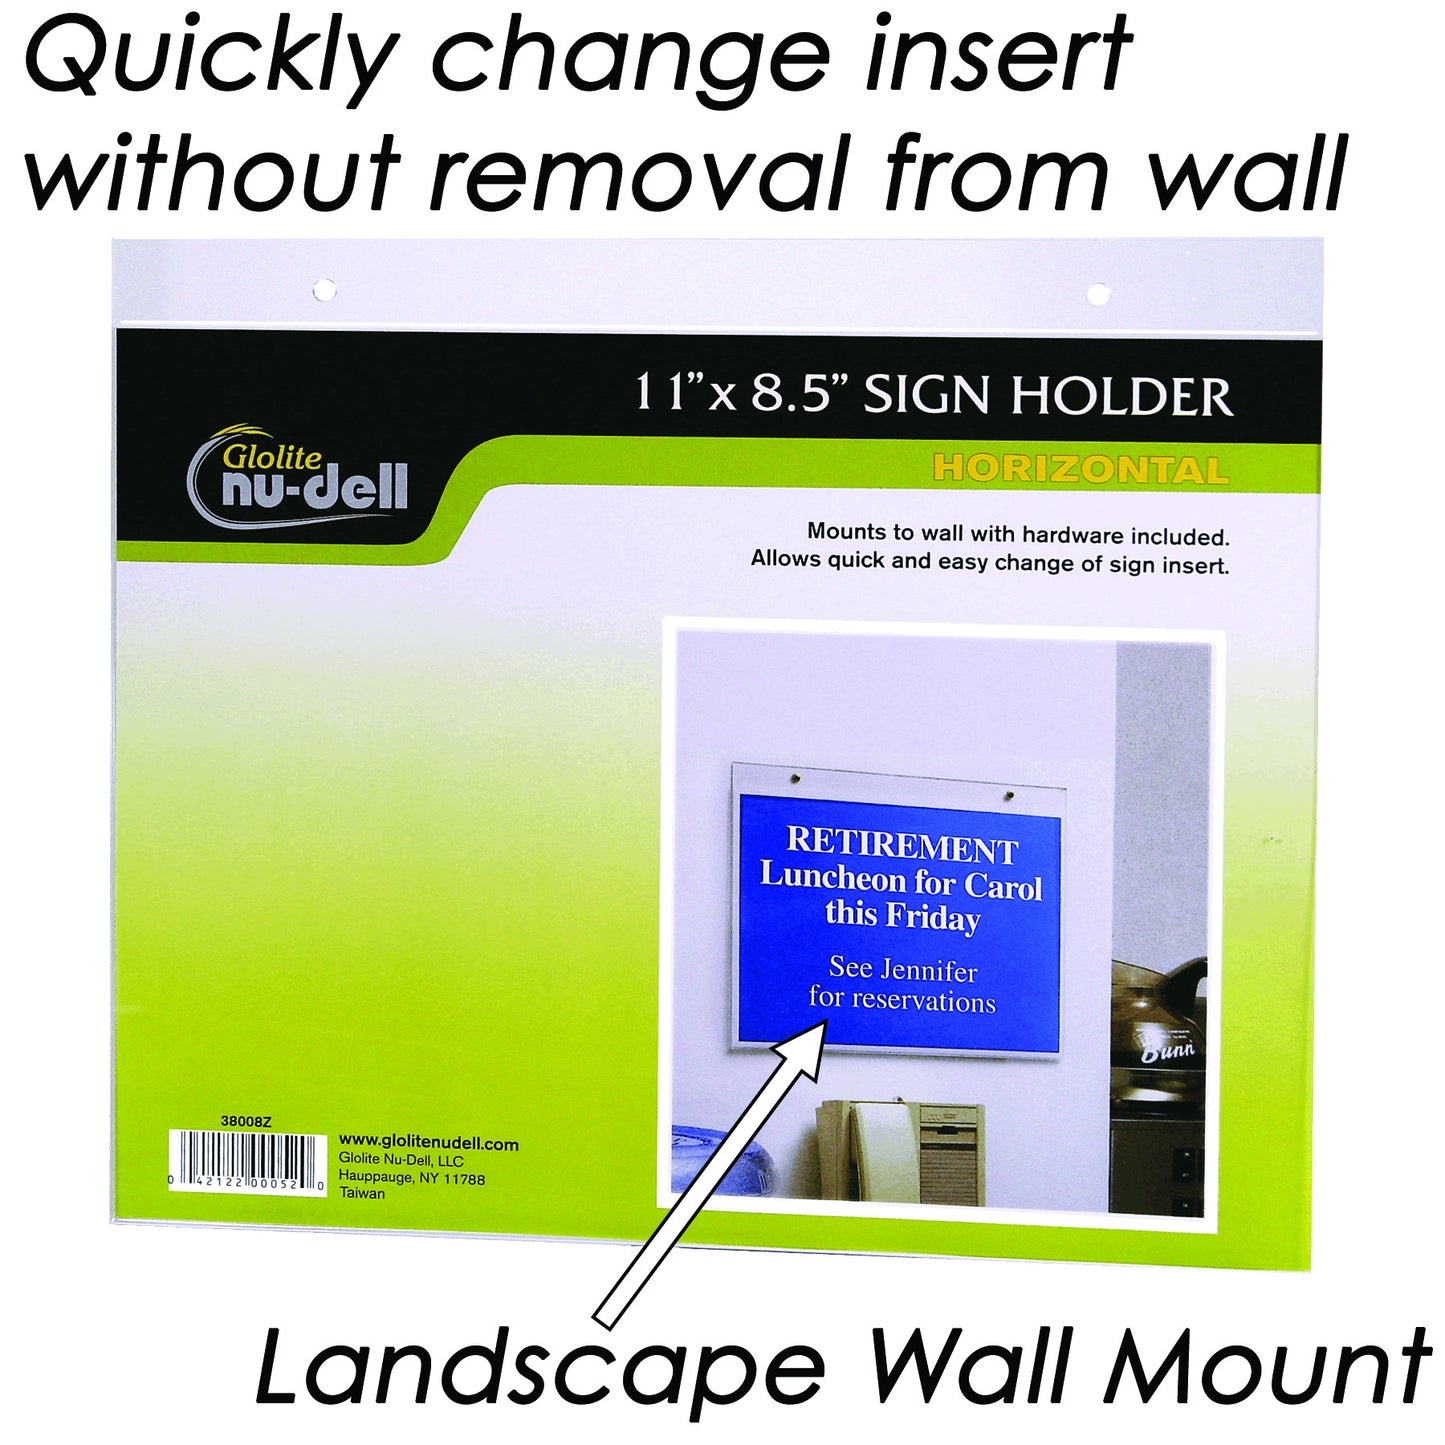 Landscape Wall Mount Clear Plastic Sign Holder 11" x 8.5"